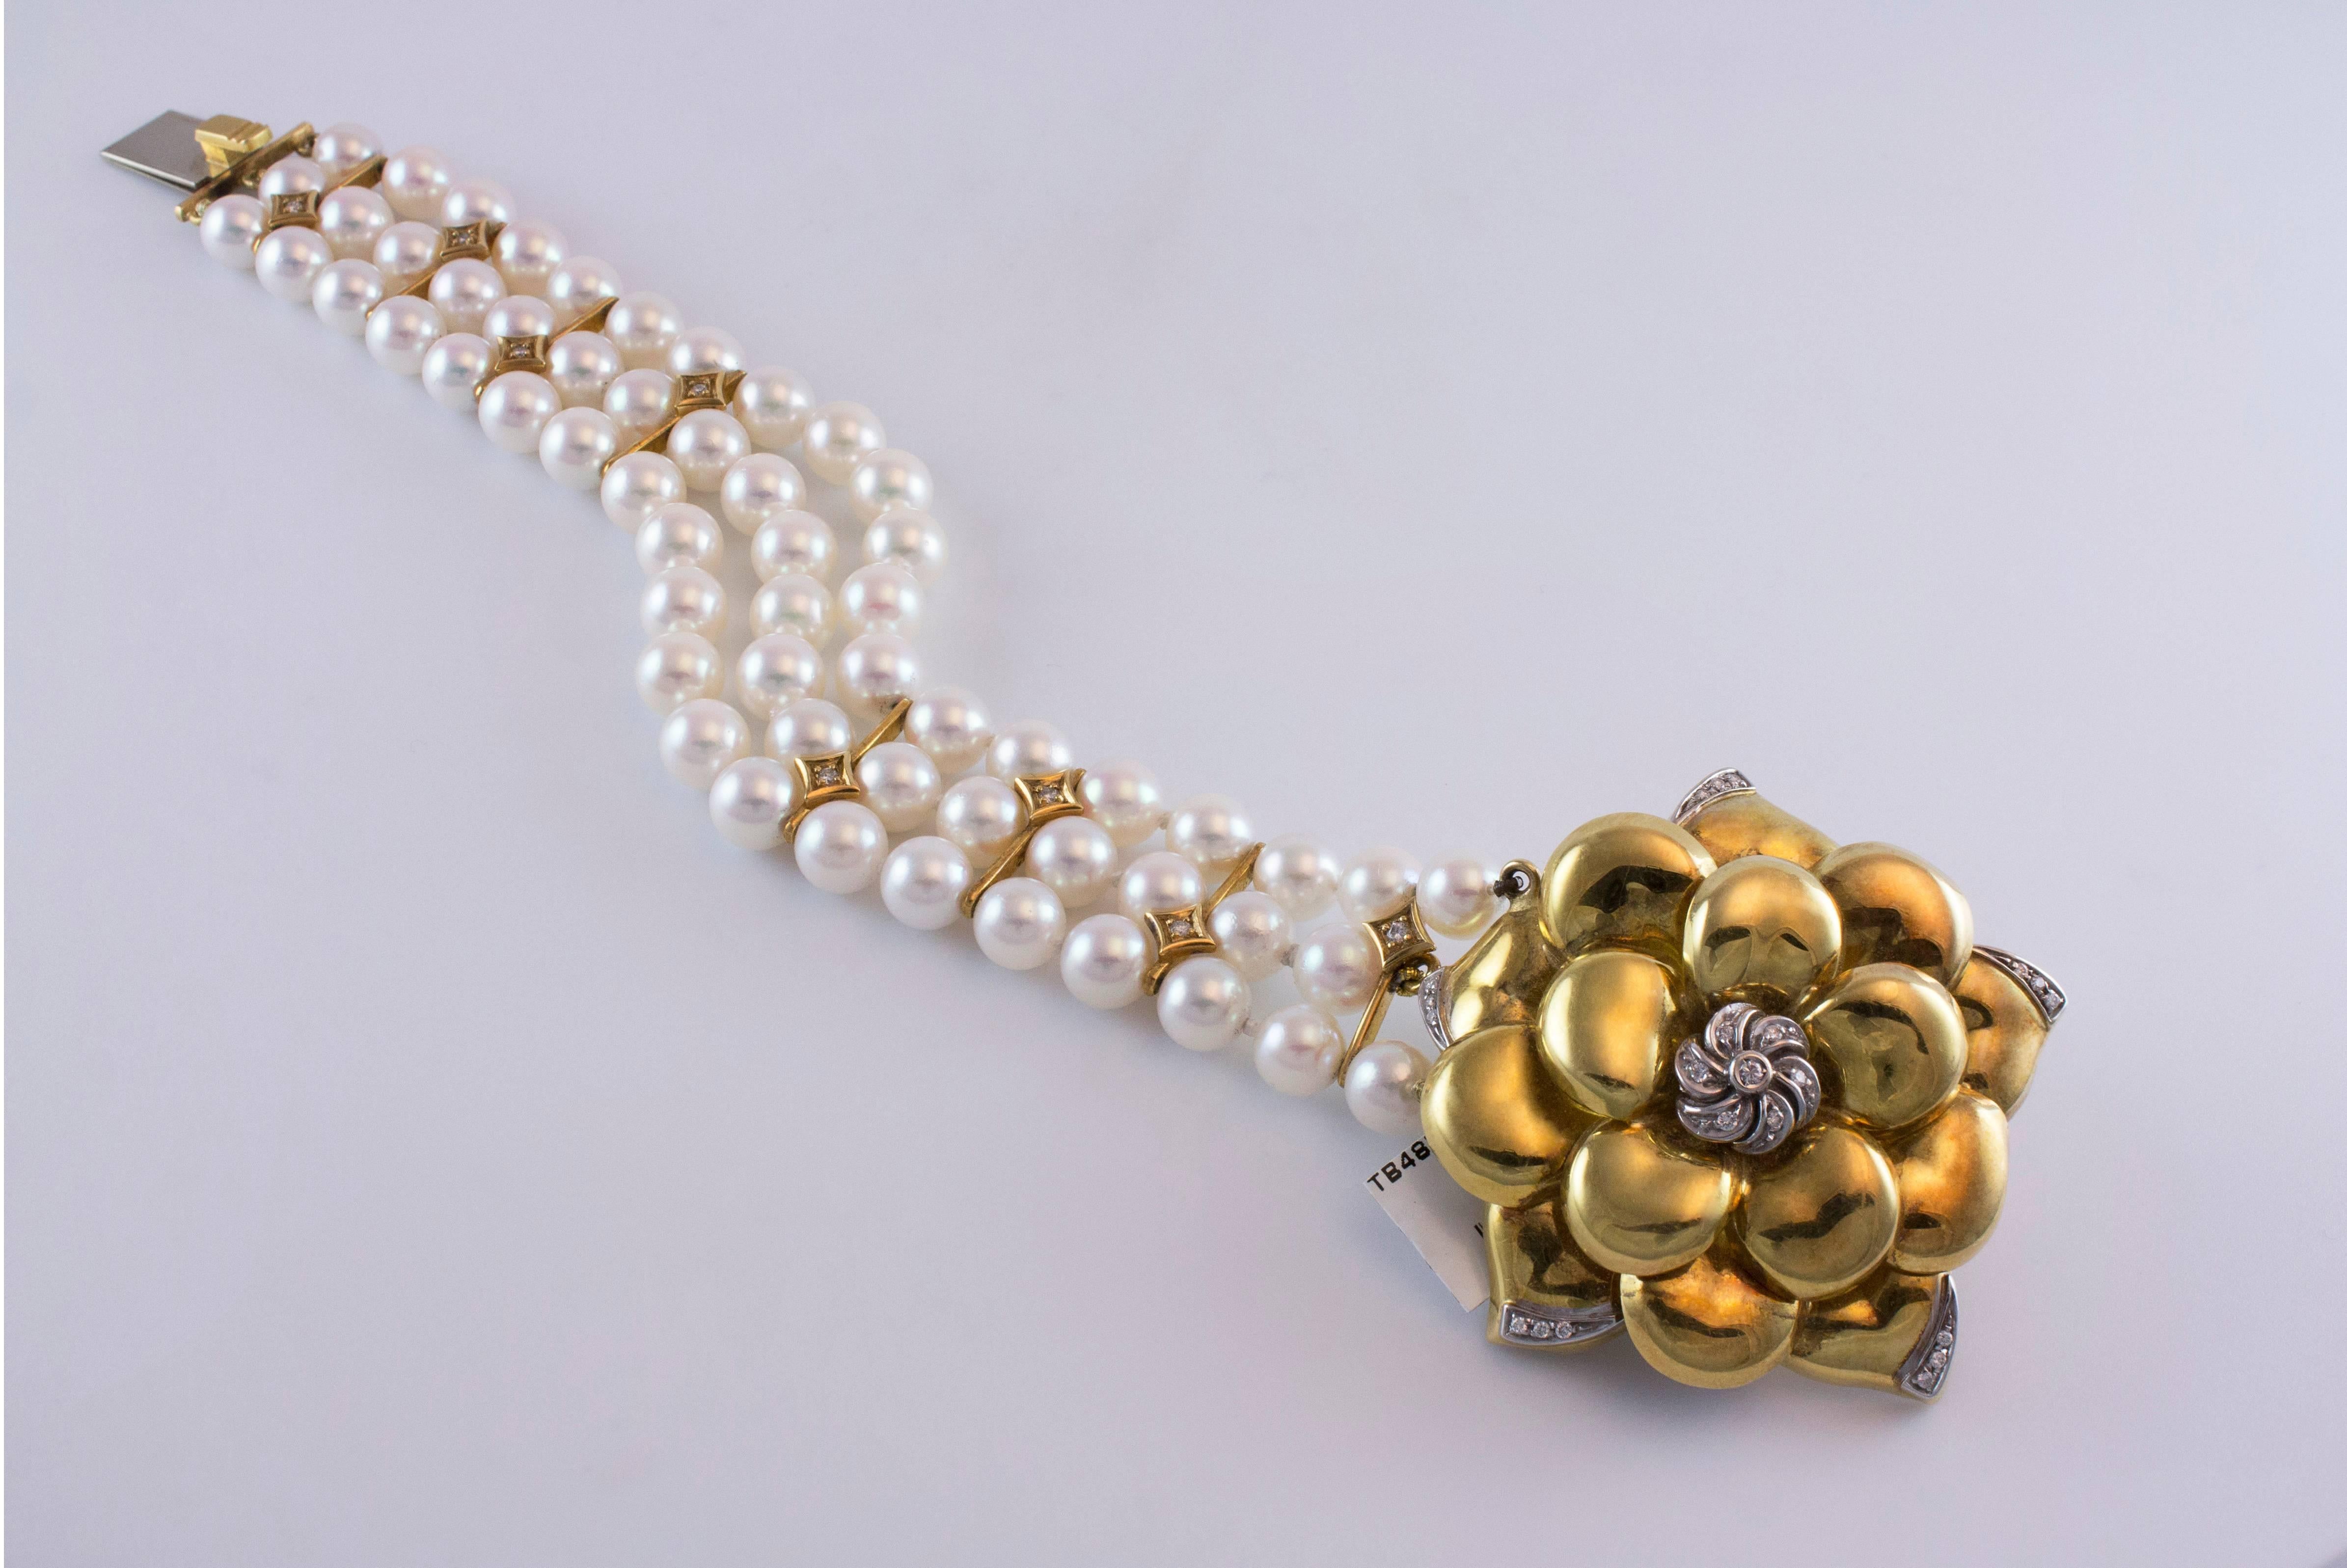 This bracelet features one 18K yellow gold flower accented by round brilliant diamonds to the three row cultured pearl strand. Total weight of diamonds approximately 0.30ct. The pearls has a great luster and a beautiful pinkish tone. The gold flower